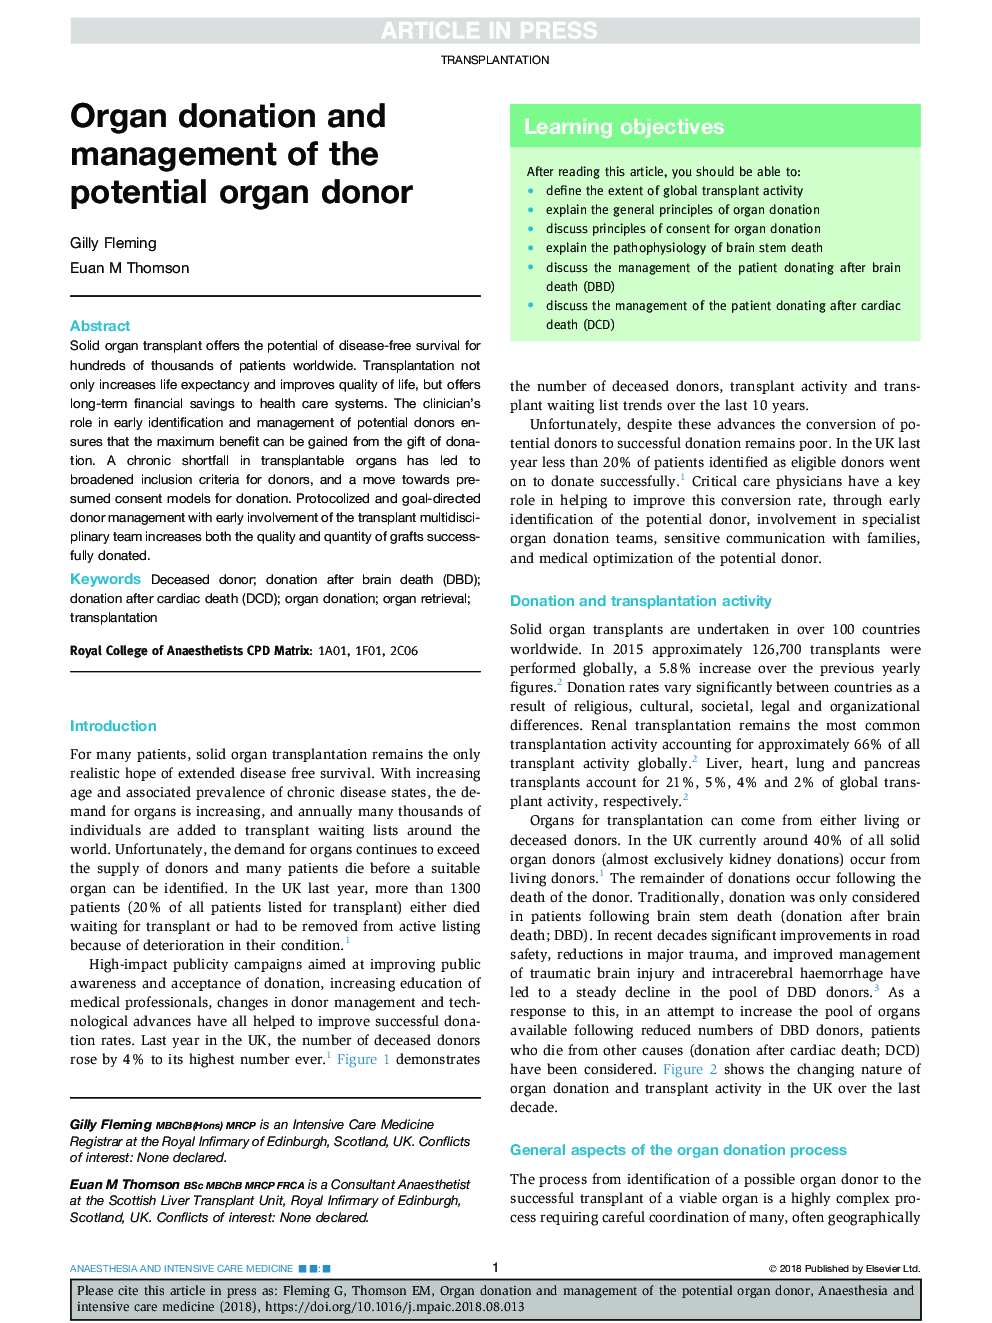 Organ donation and management of the potential organ donor